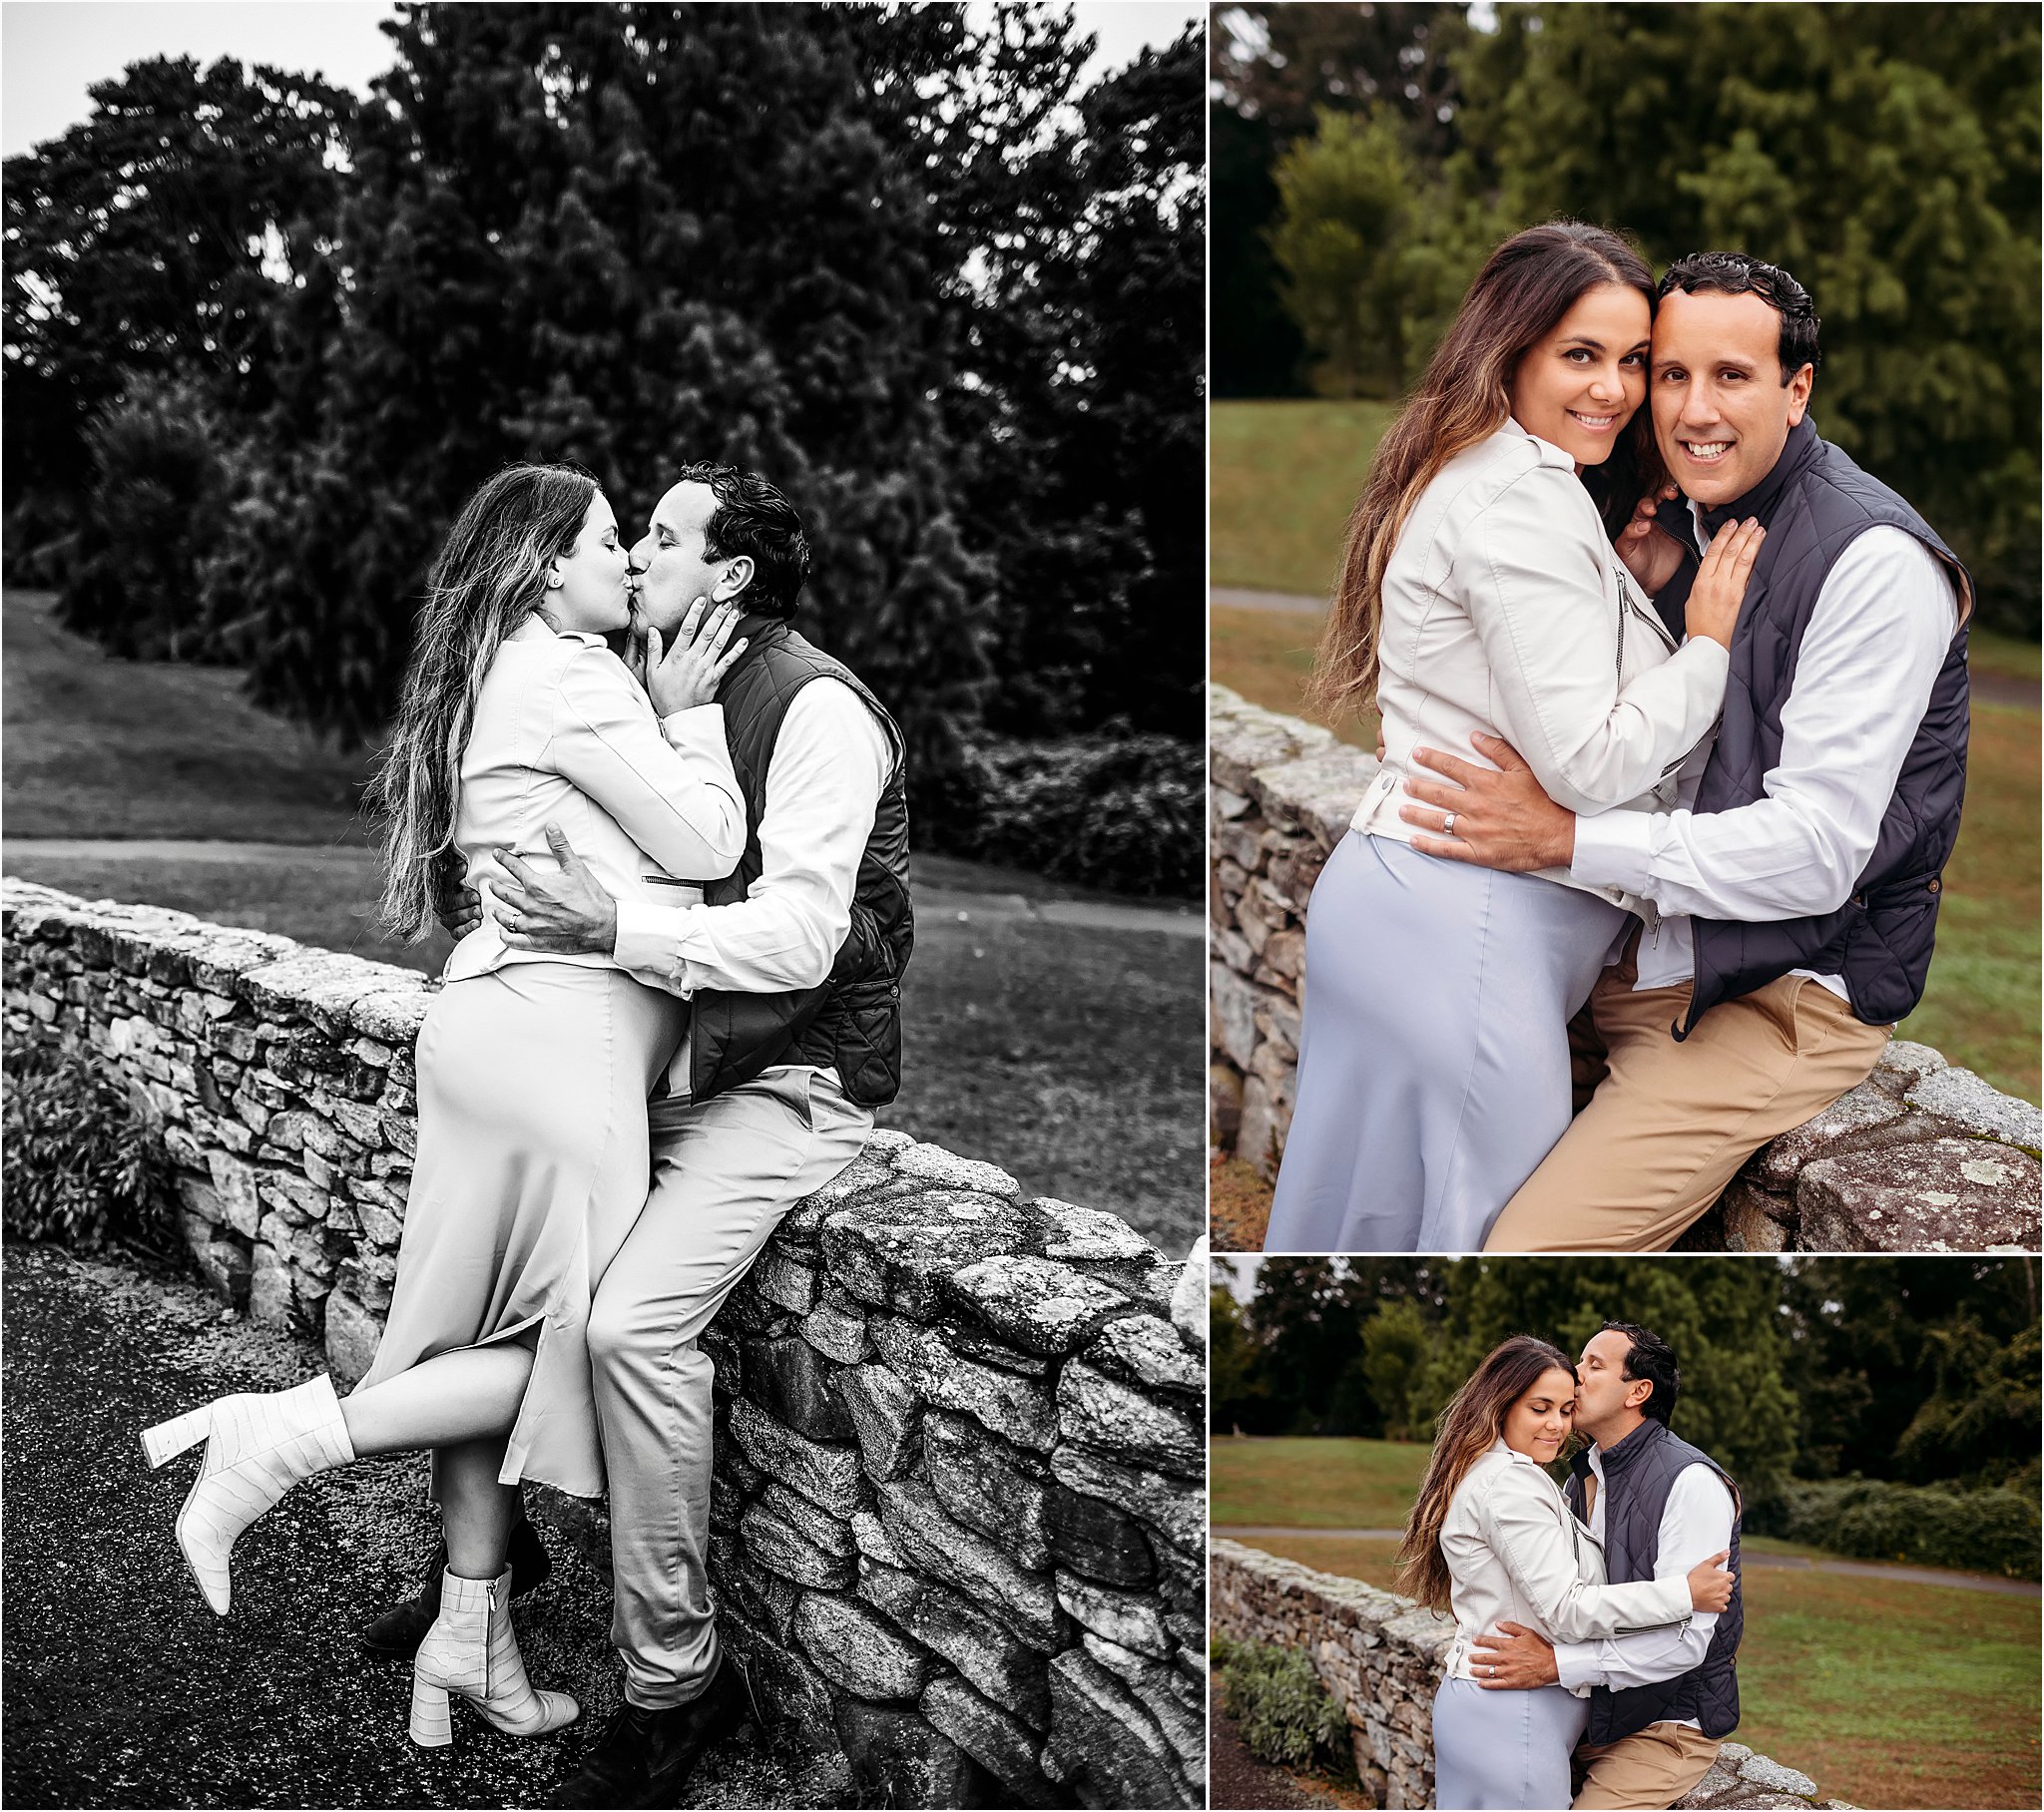 photos of a man and his wife, Westbrook, CT Photographer